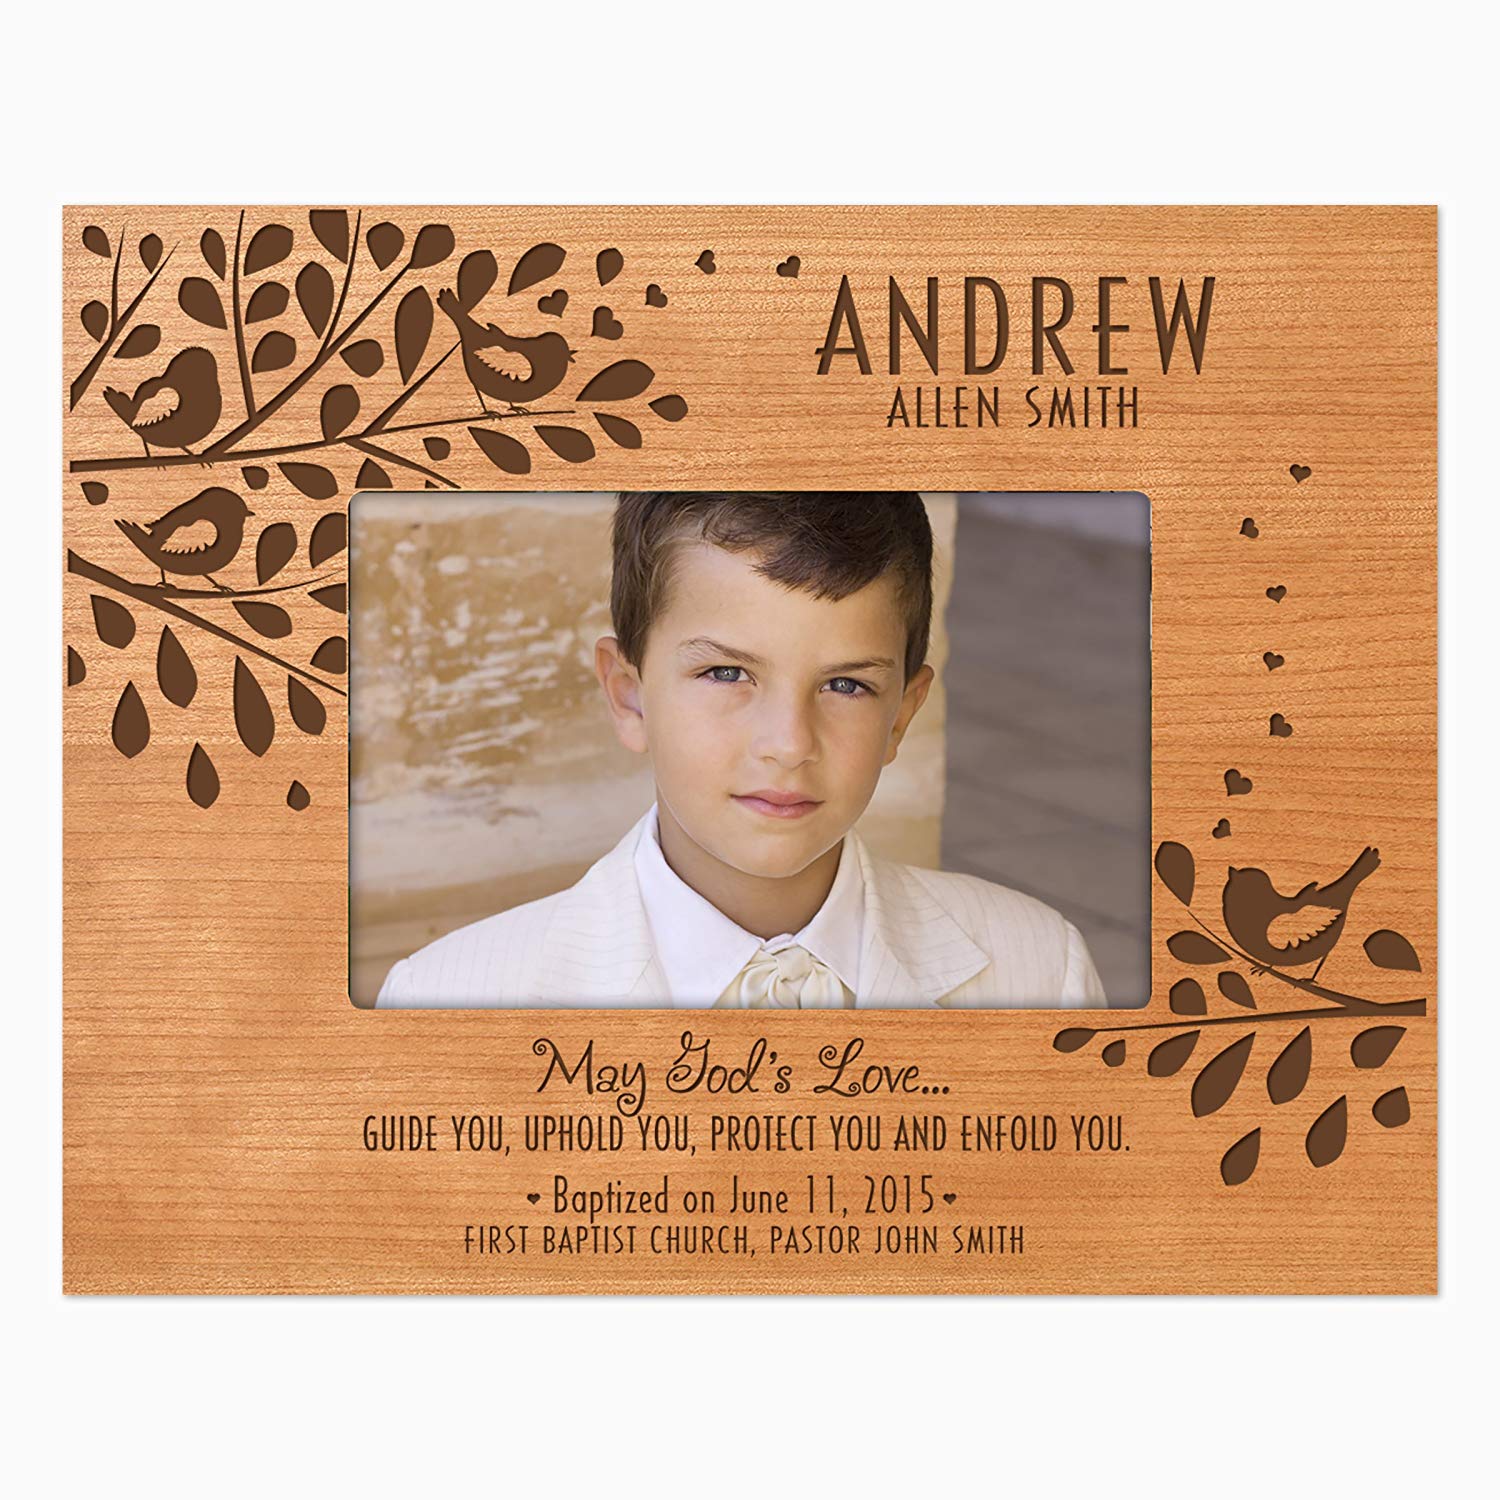 Personalized Godparent Picture Frame Gift "Guide Uphold Protect" - LifeSong Milestones